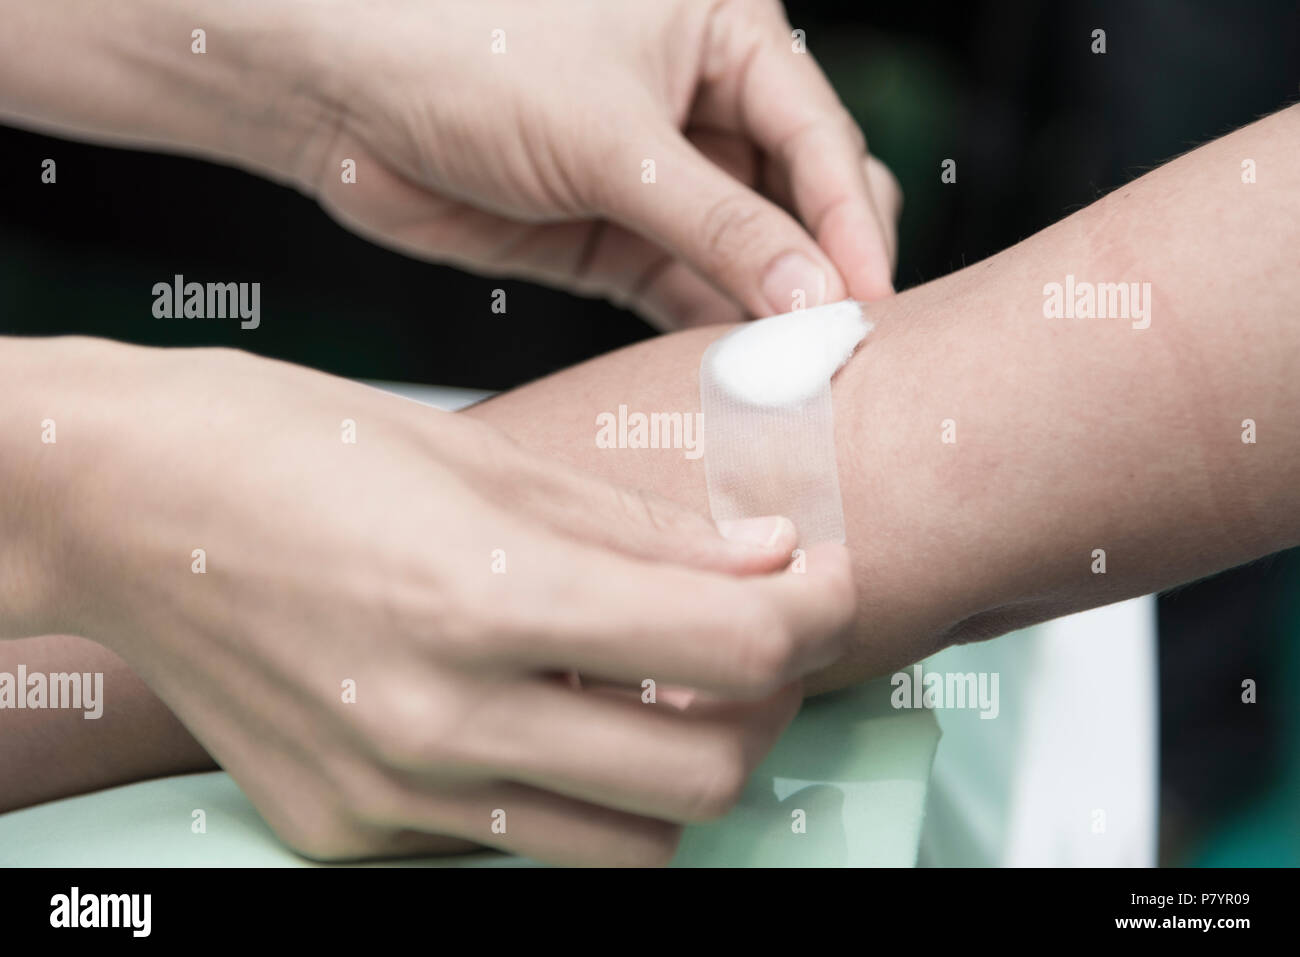 Healing wound from blood collect of physical examination, Hospital and first aid concept Stock Photo